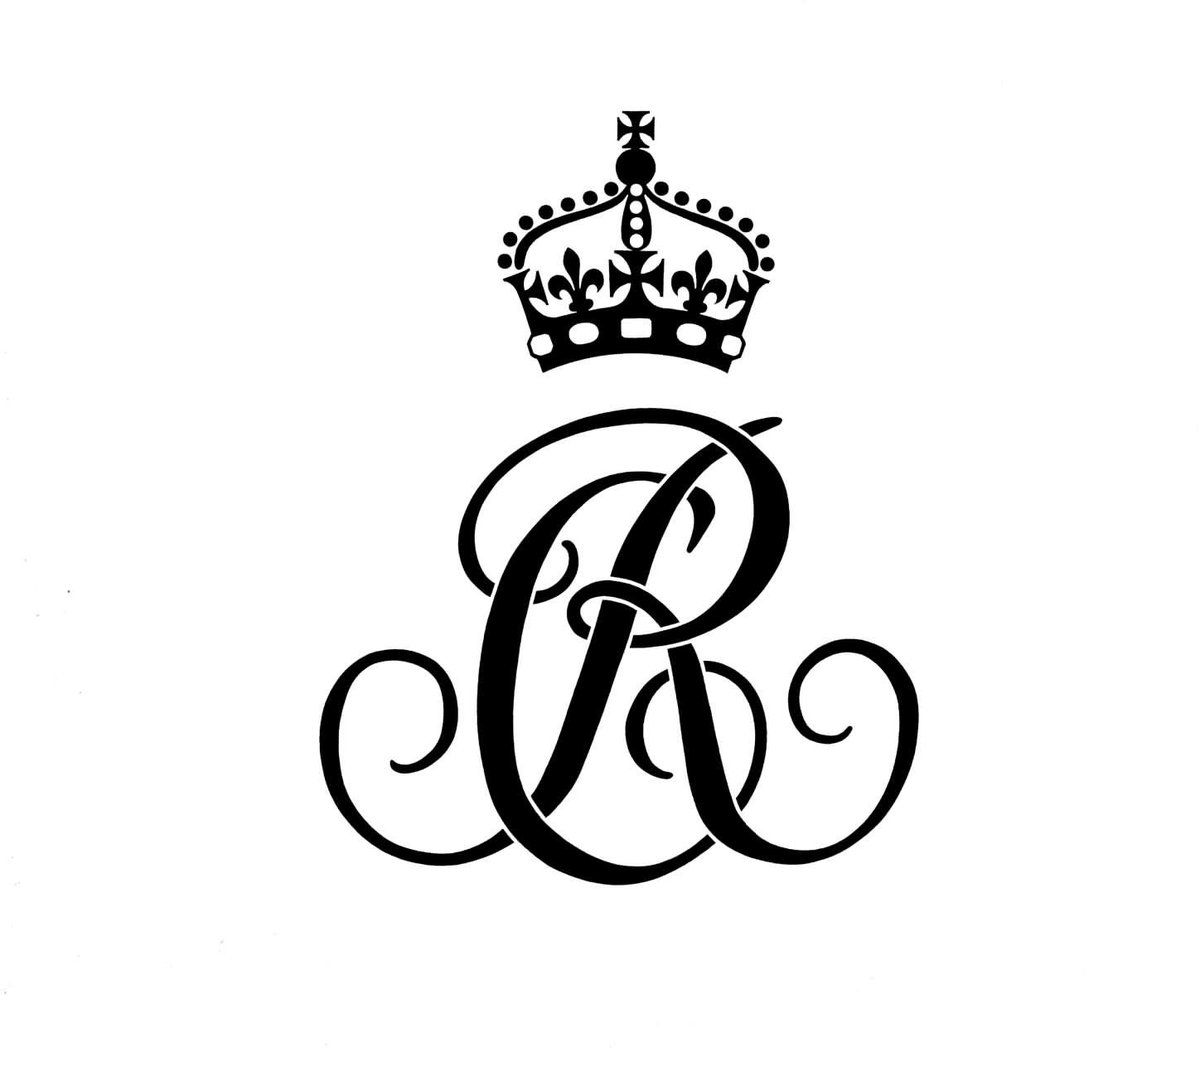 👑 The Queen Consort’s new cypher is made of up of Her Majesty’s monogram (‘C’ for Camilla, and ‘R’ for Regina, Latin for Queen) and a crown. 

The cypher will be used on official correspondence.